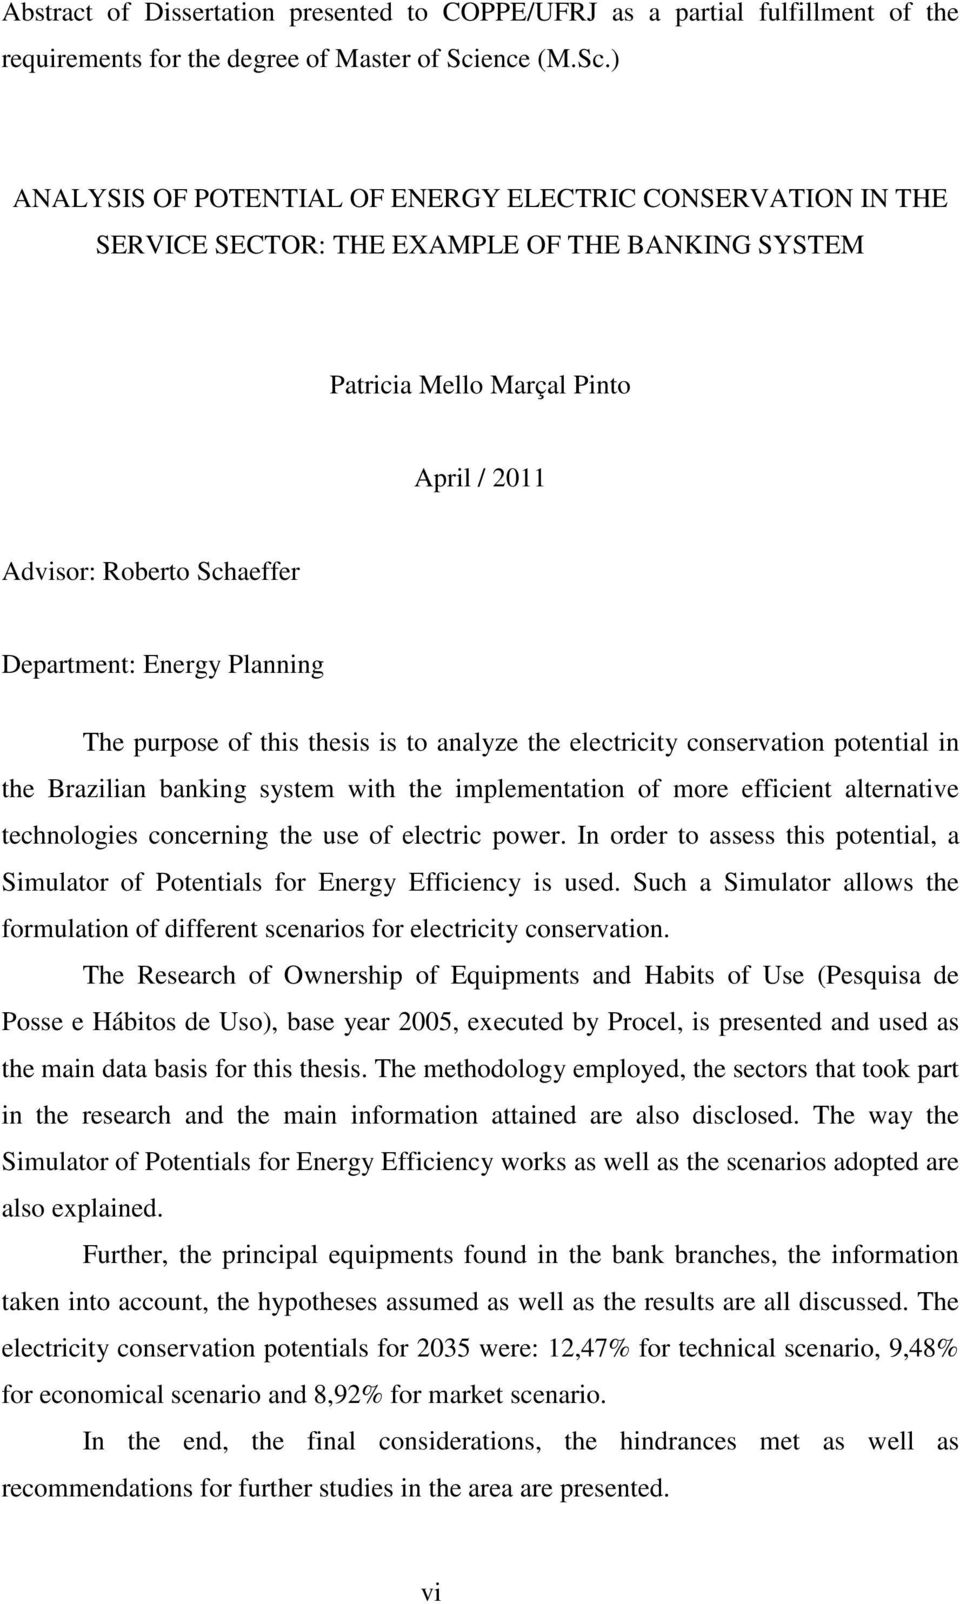 ) ANALYSIS OF POTENTIAL OF ENERGY ELECTRIC CONSERVATION IN THE SERVICE SECTOR: THE EXAMPLE OF THE BANKING SYSTEM Patricia Mello Marçal Pinto April / 2011 Advisor: Roberto Schaeffer Department: Energy